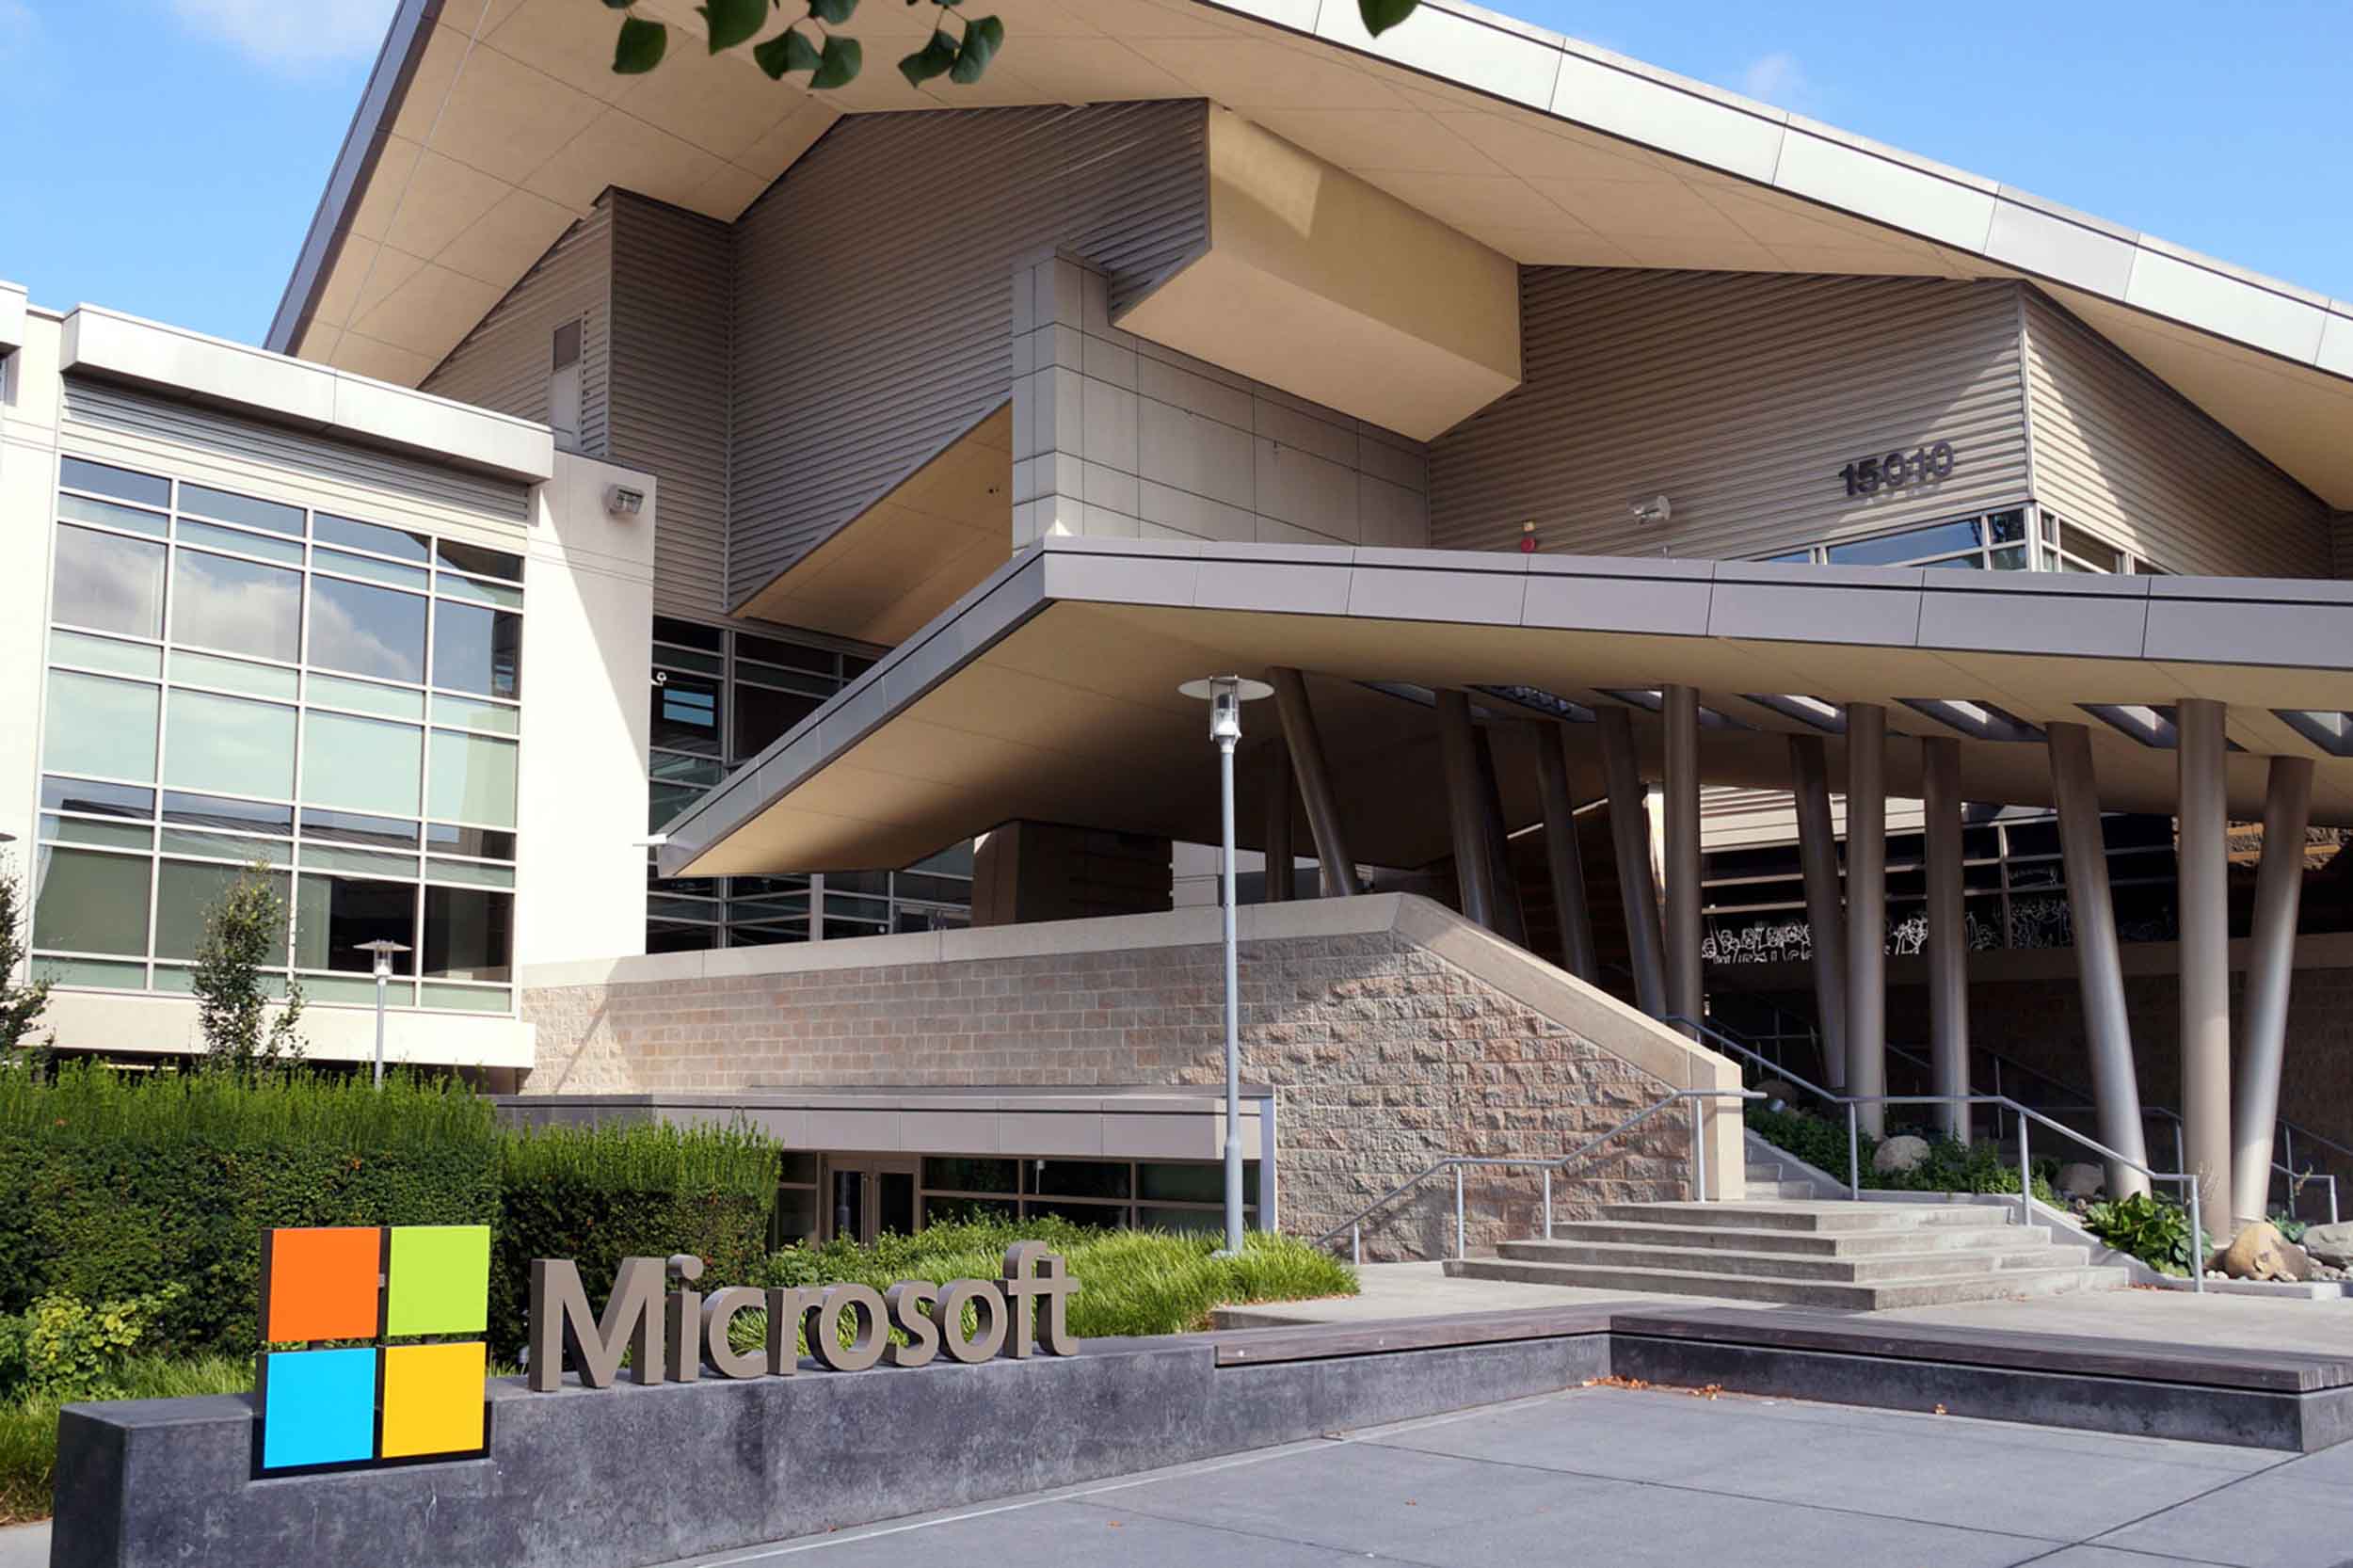 Exterior view of the Microsoft headquarters building